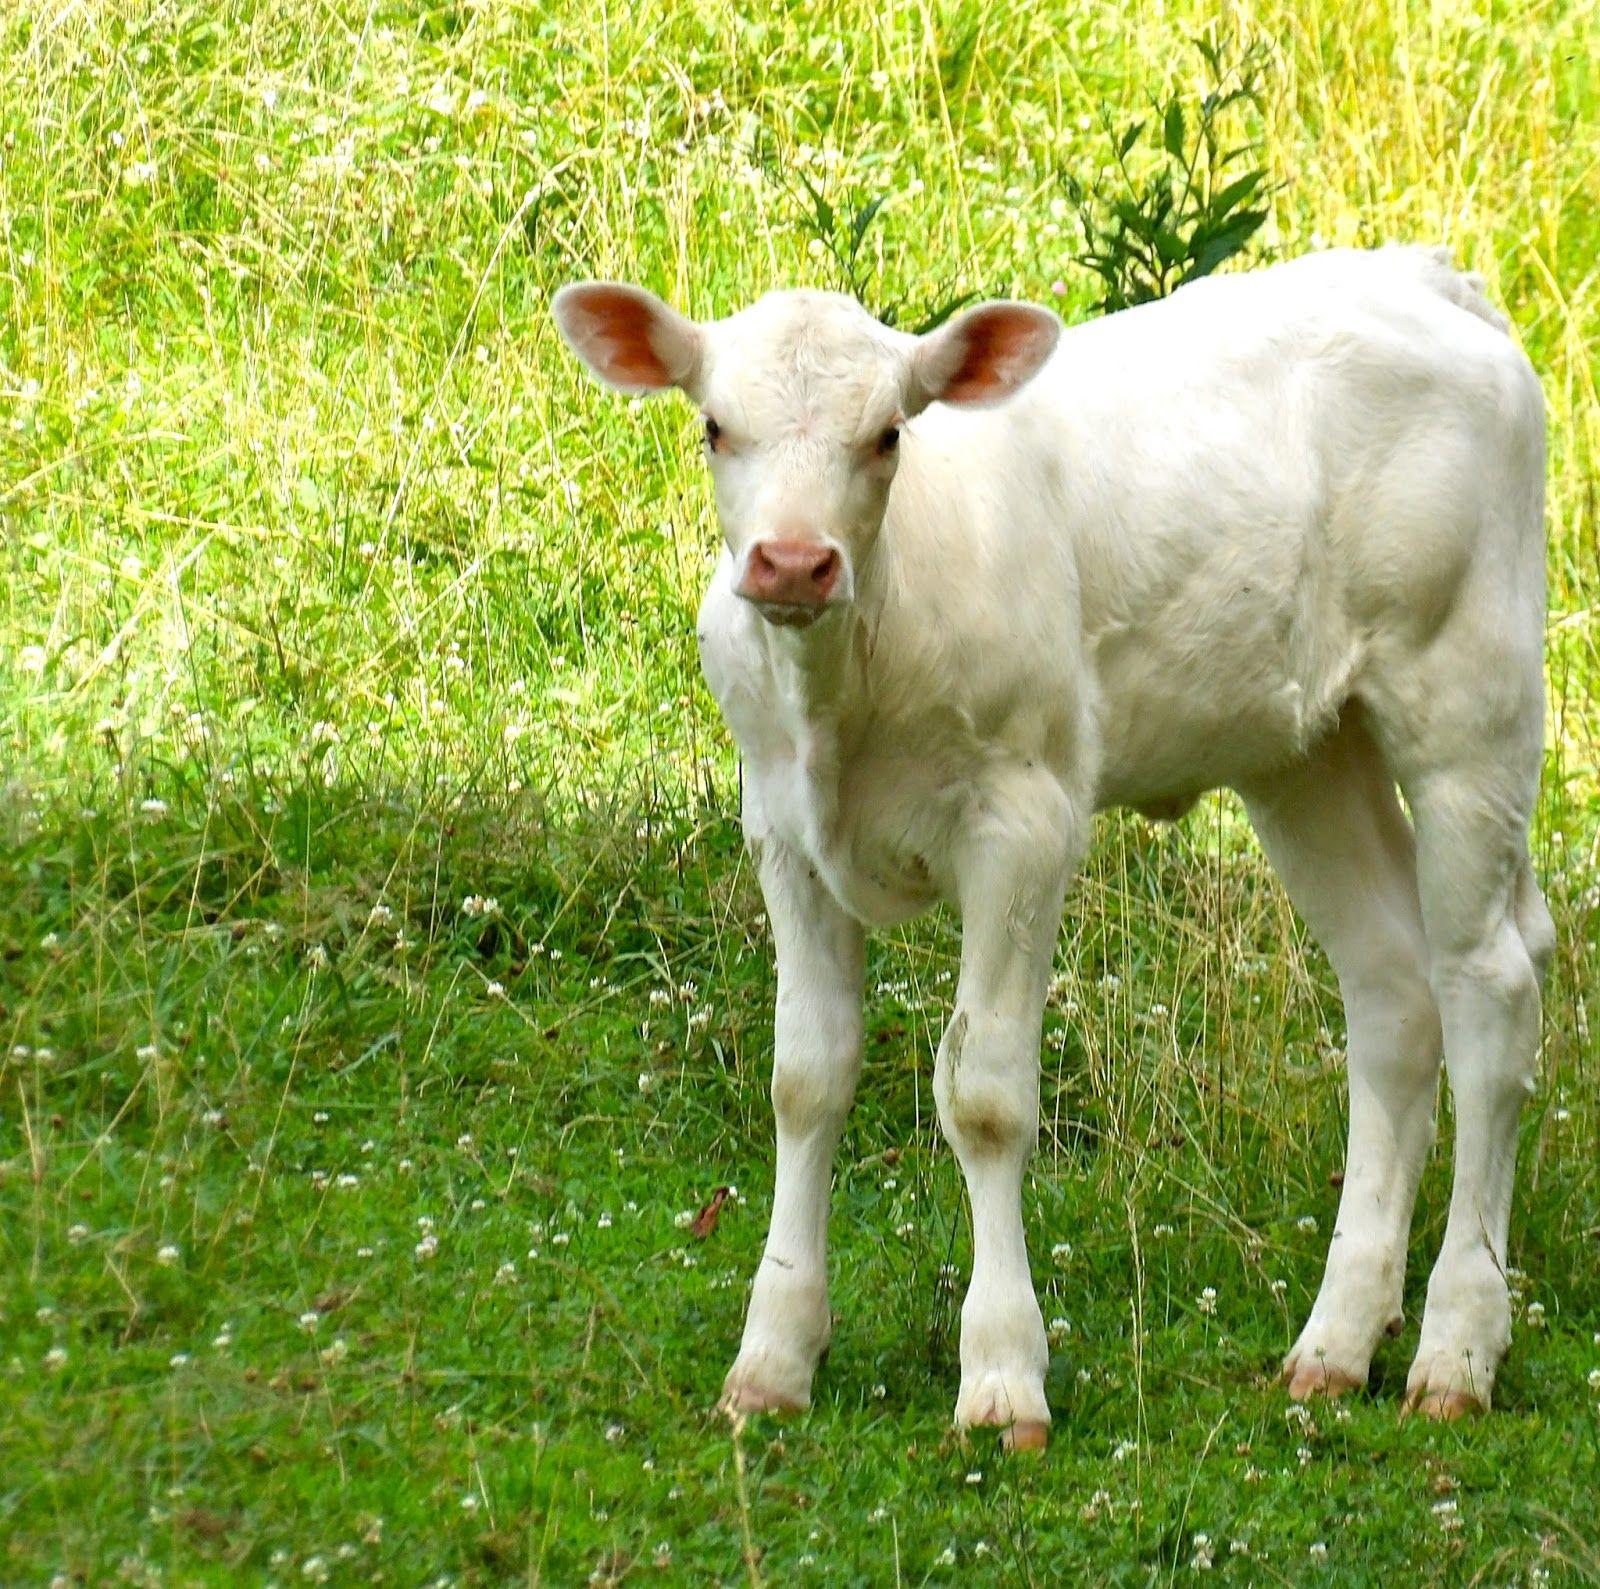 Download cow image